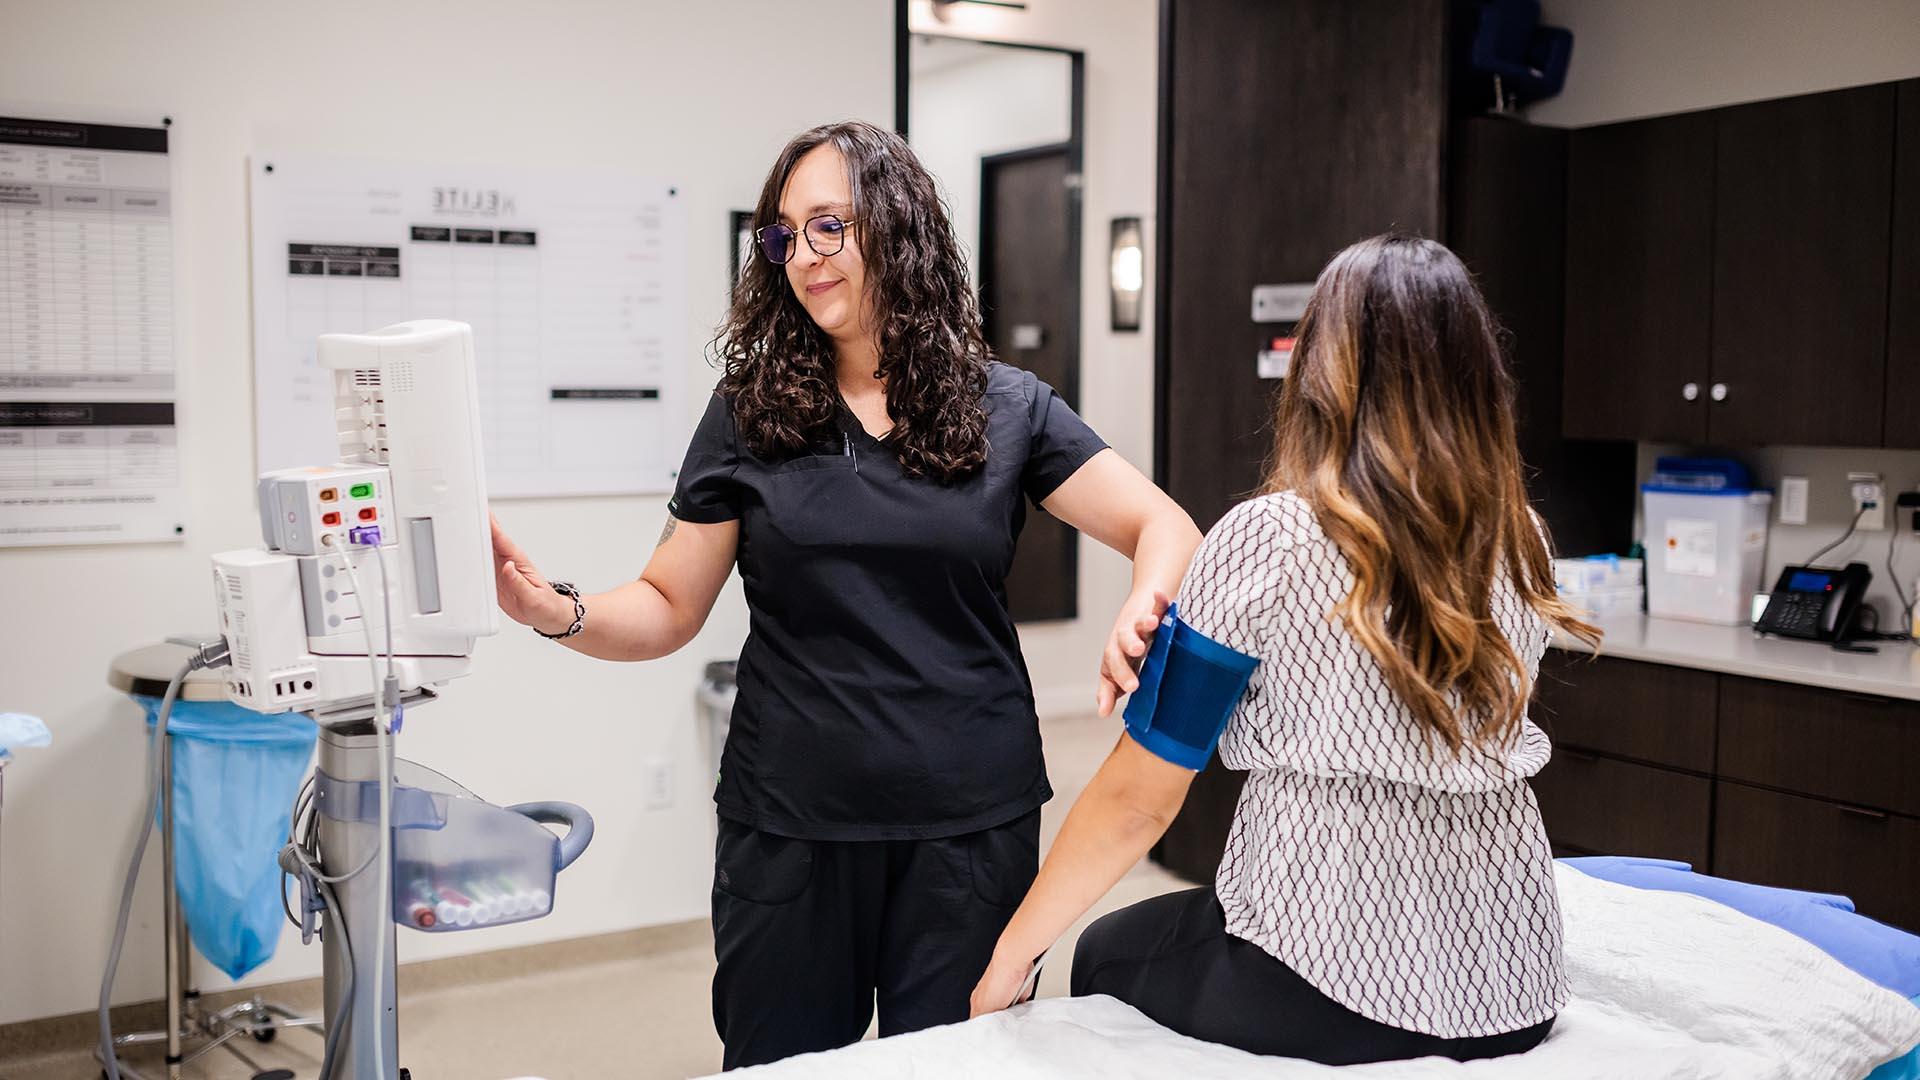 MSU Denver alumna Alejandra Webster, a recipient of the Deferred Action for Childhood Arrivals program, became a registered nurse in 2021 and just started a new job at a private clinic. Photo by Alyson McClaran